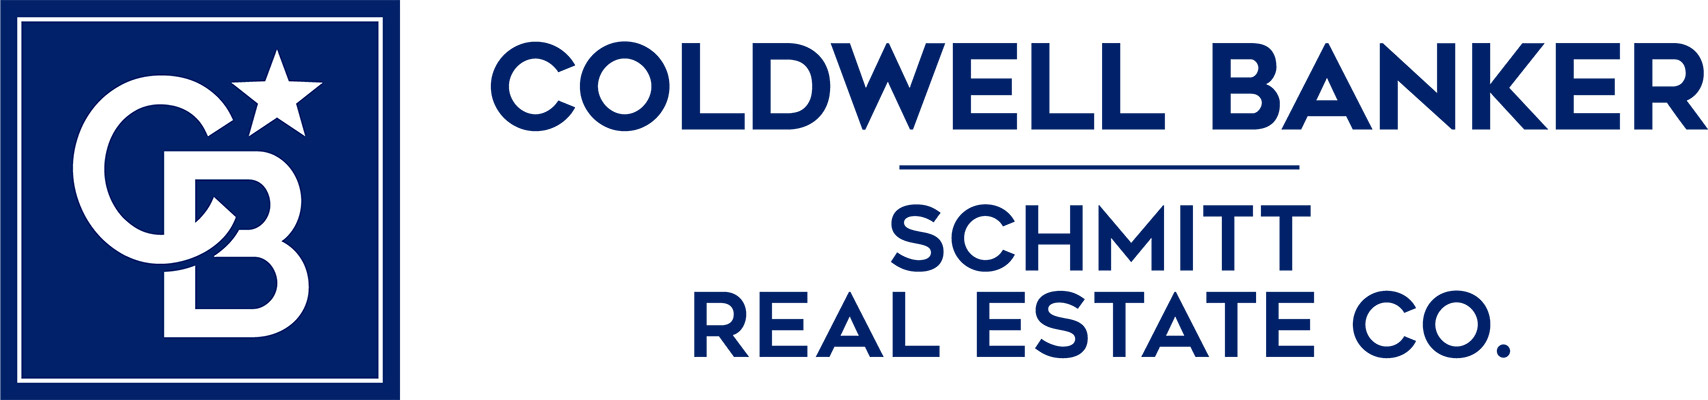 Patricia Nickless - Coldwell Banker Logo